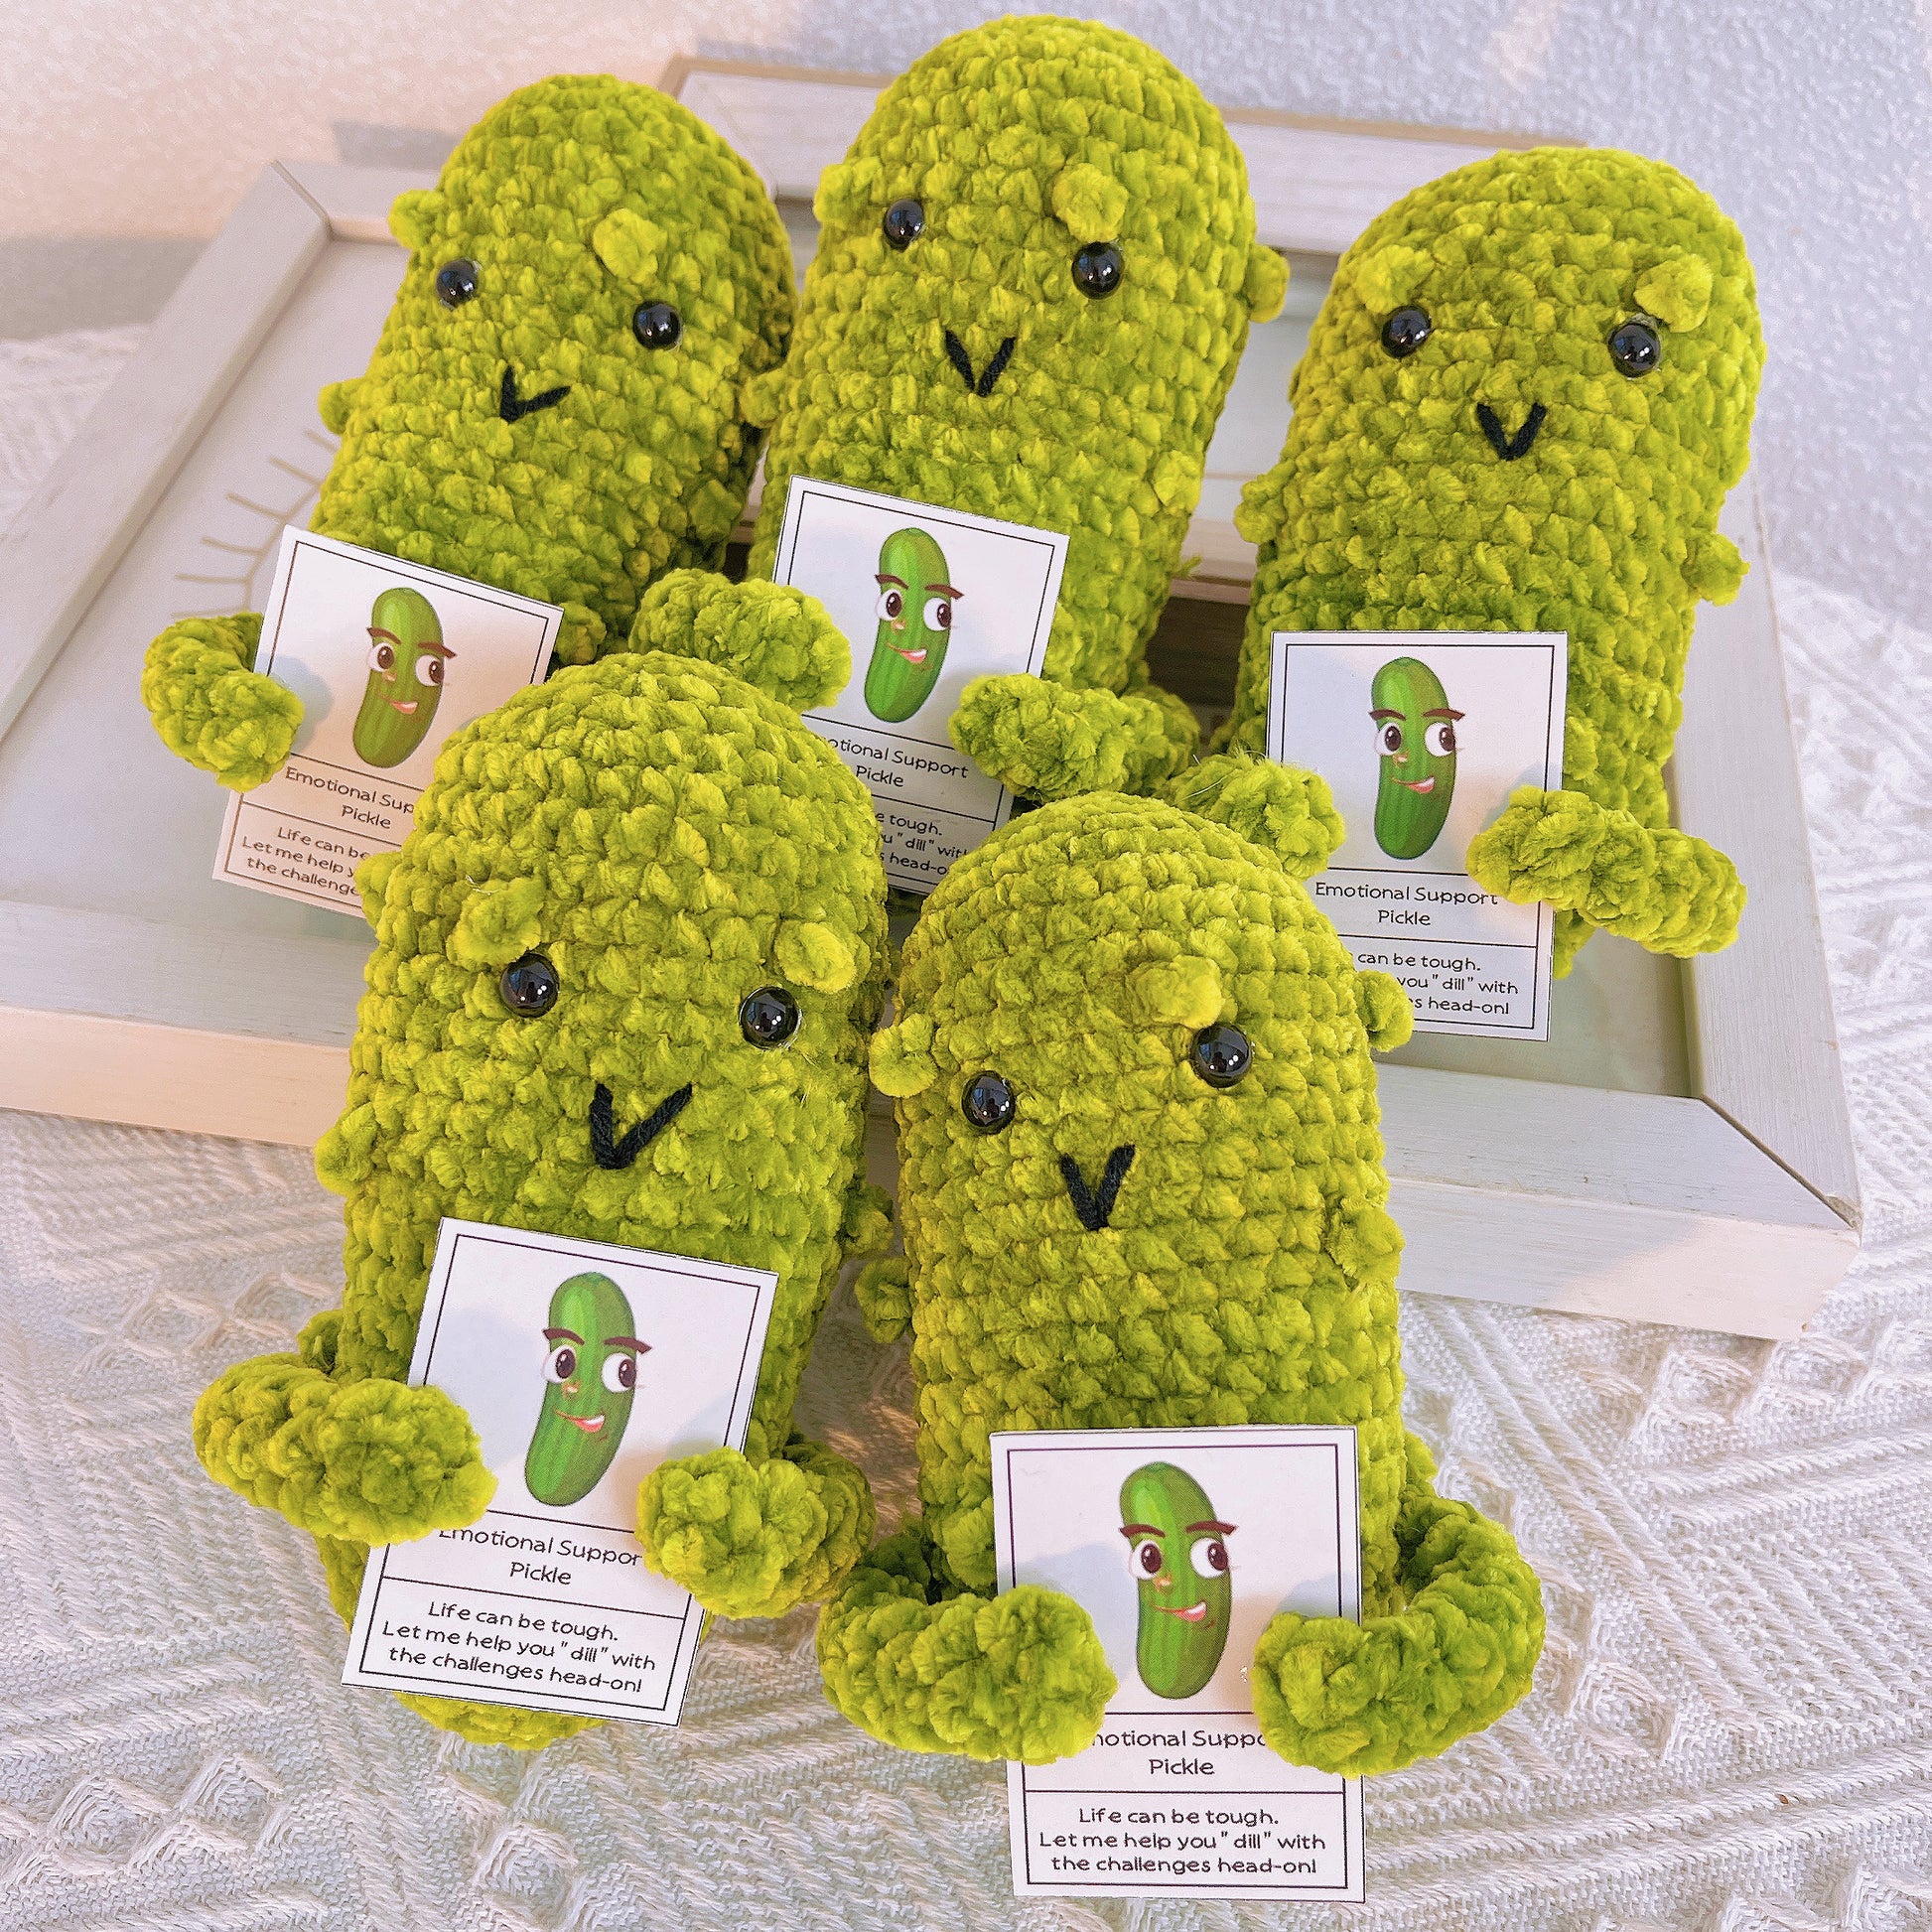 Handmade Smiling Stuffed Friendship Emotional Support Pickle for Adults Kids